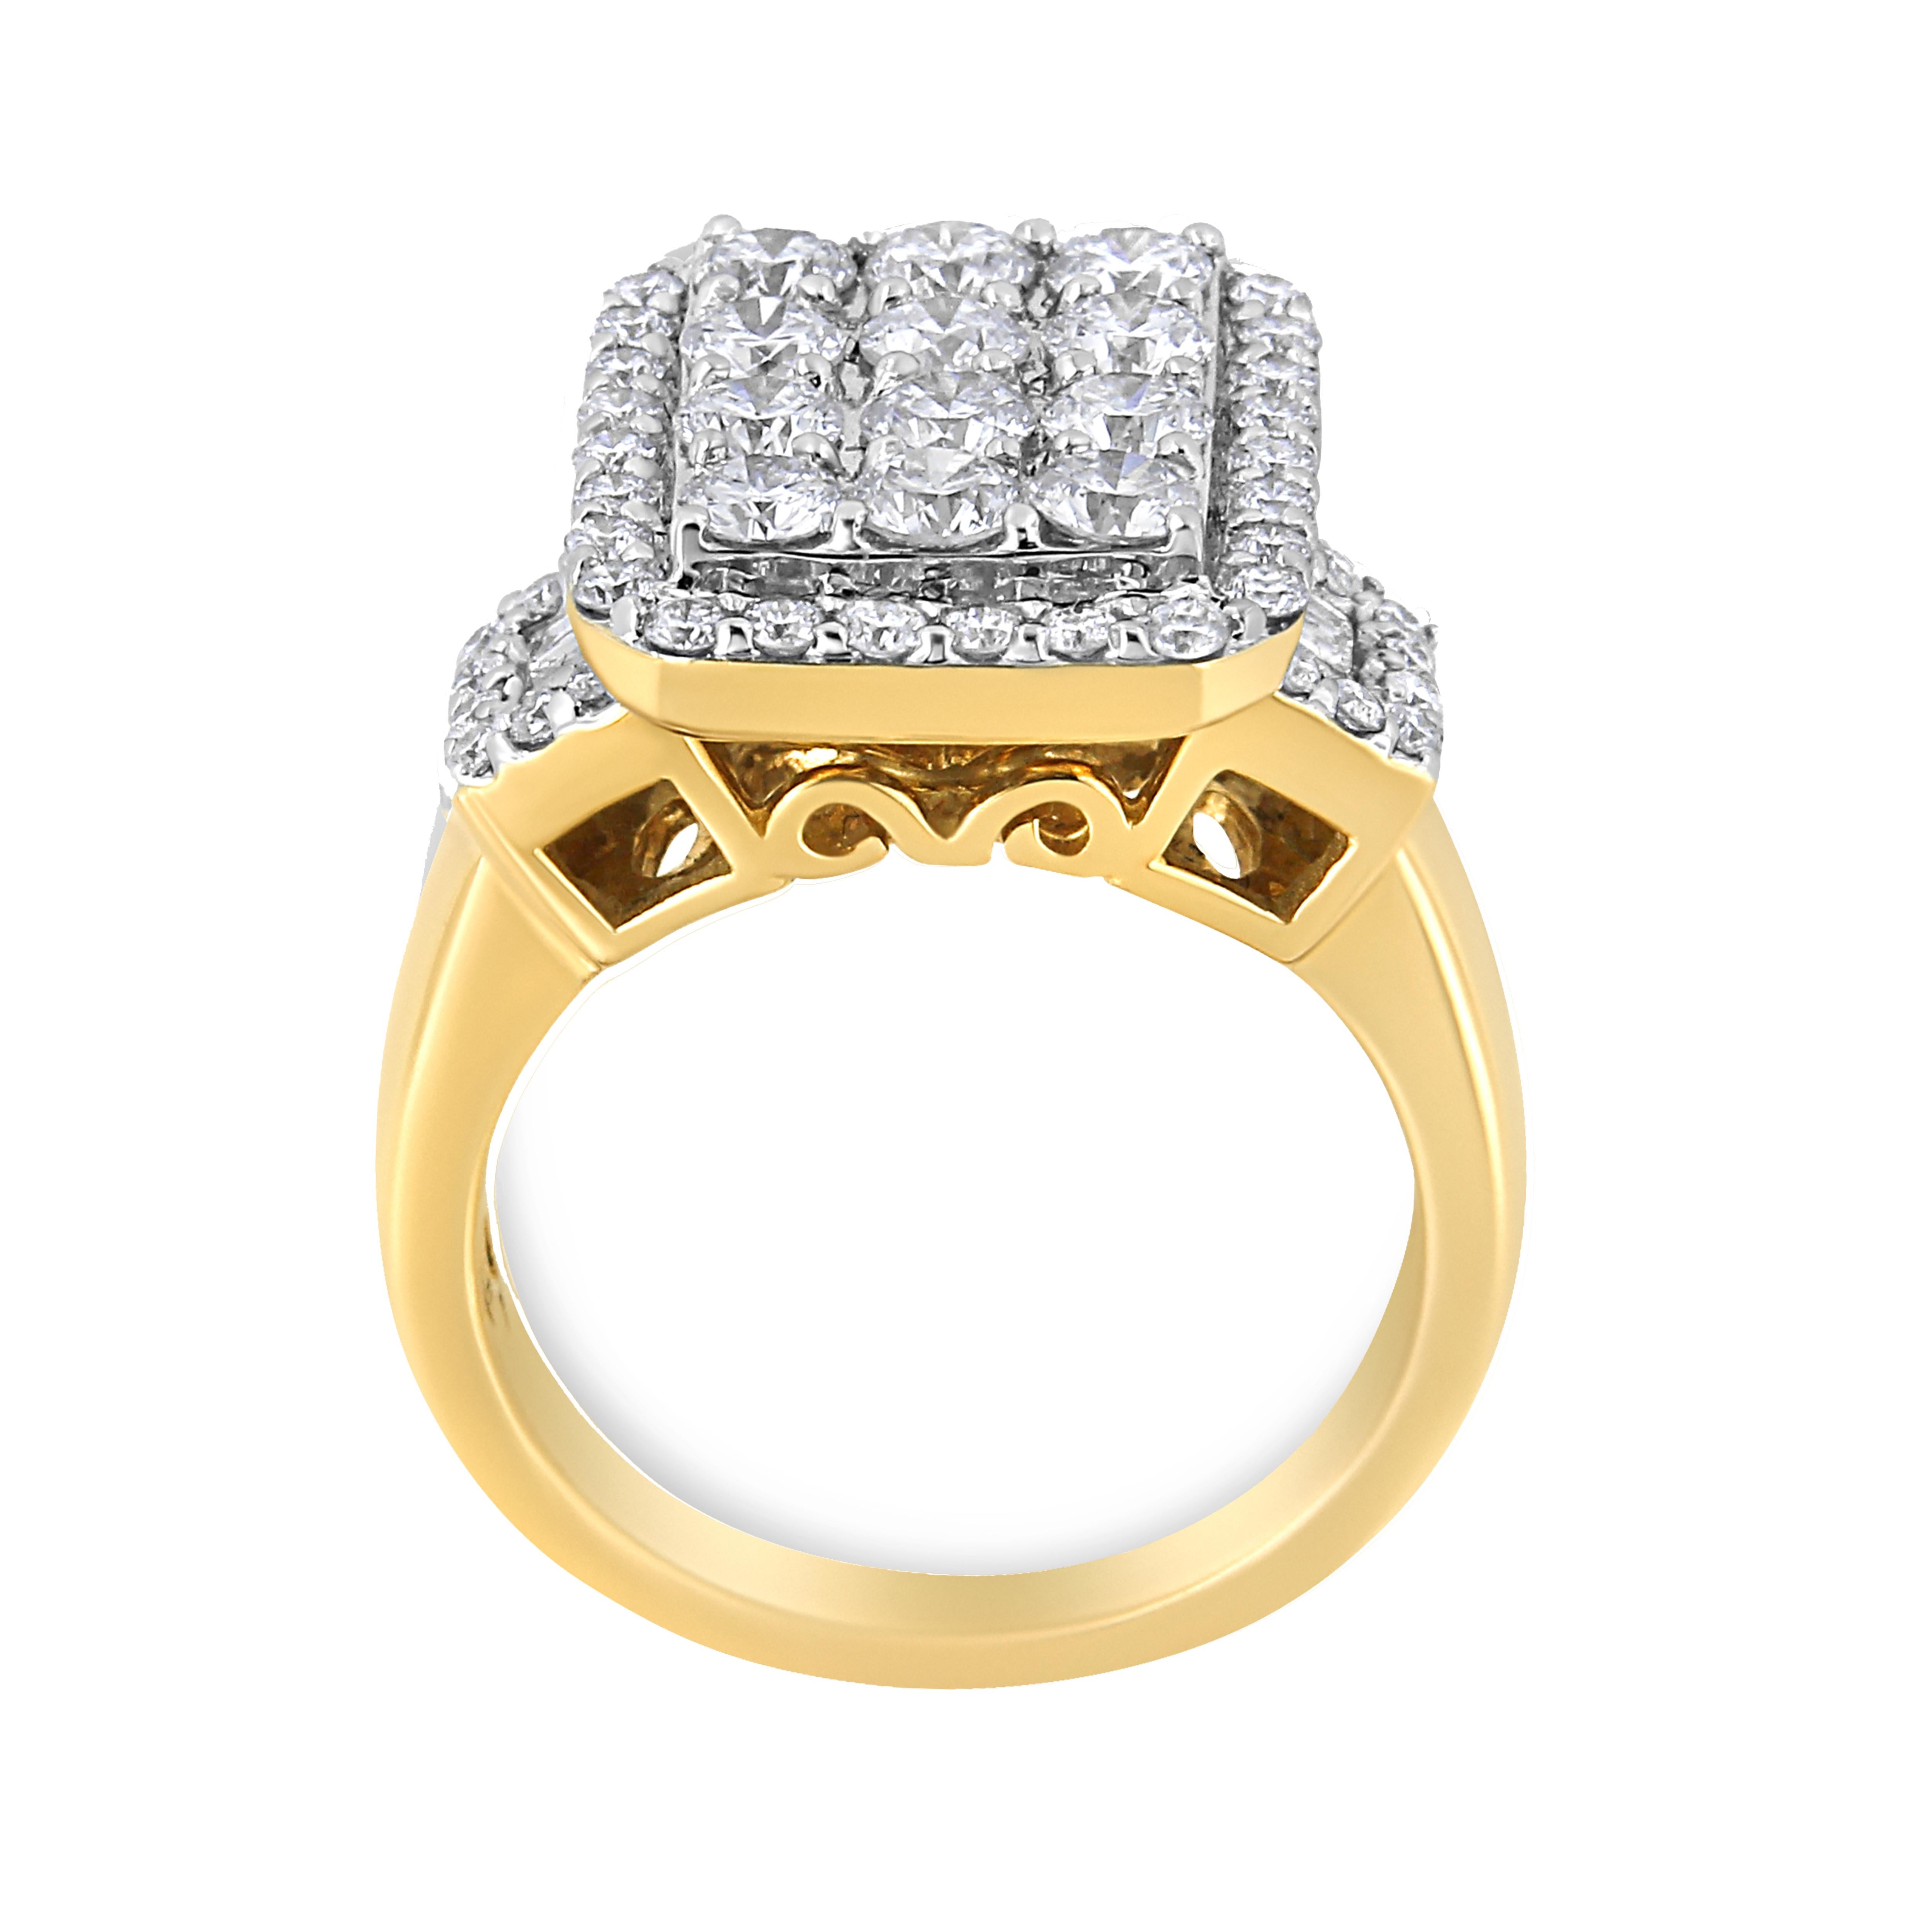 Contemporary 14K Yellow Gold 2 1/4 Carat Diamond Emerald Shape with Halo Cocktail Ring